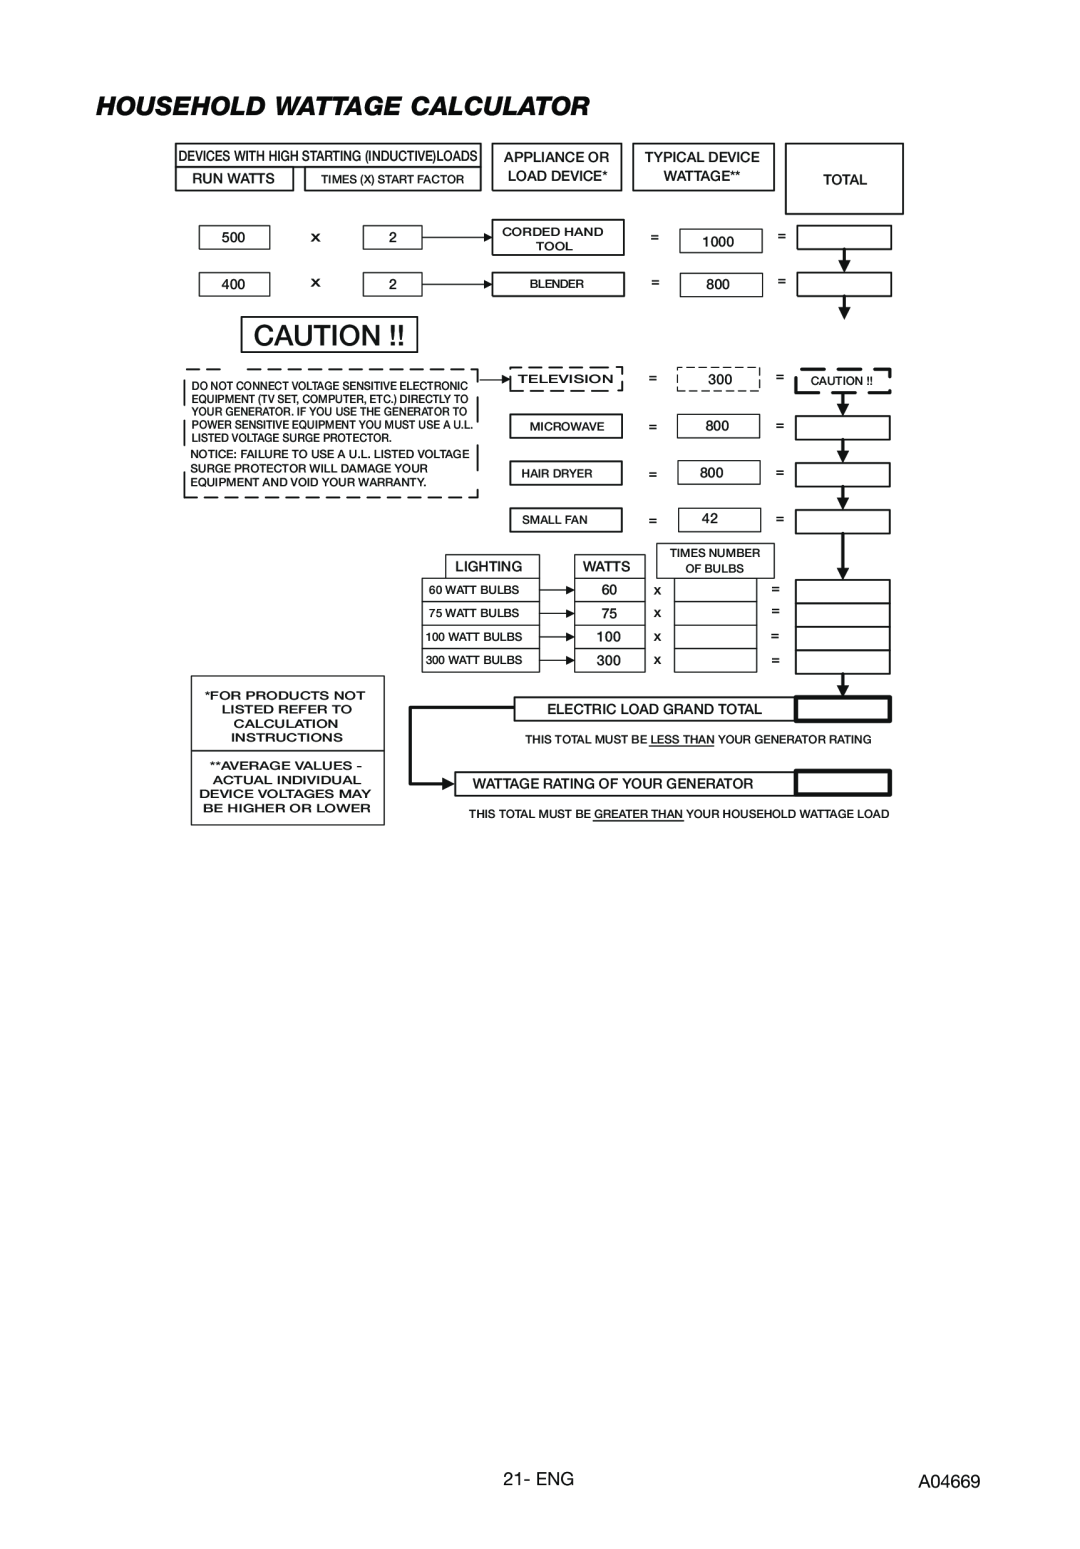 DeVillbiss Air Power Company A04669, GM1000 specifications Household Wattage Calculator 